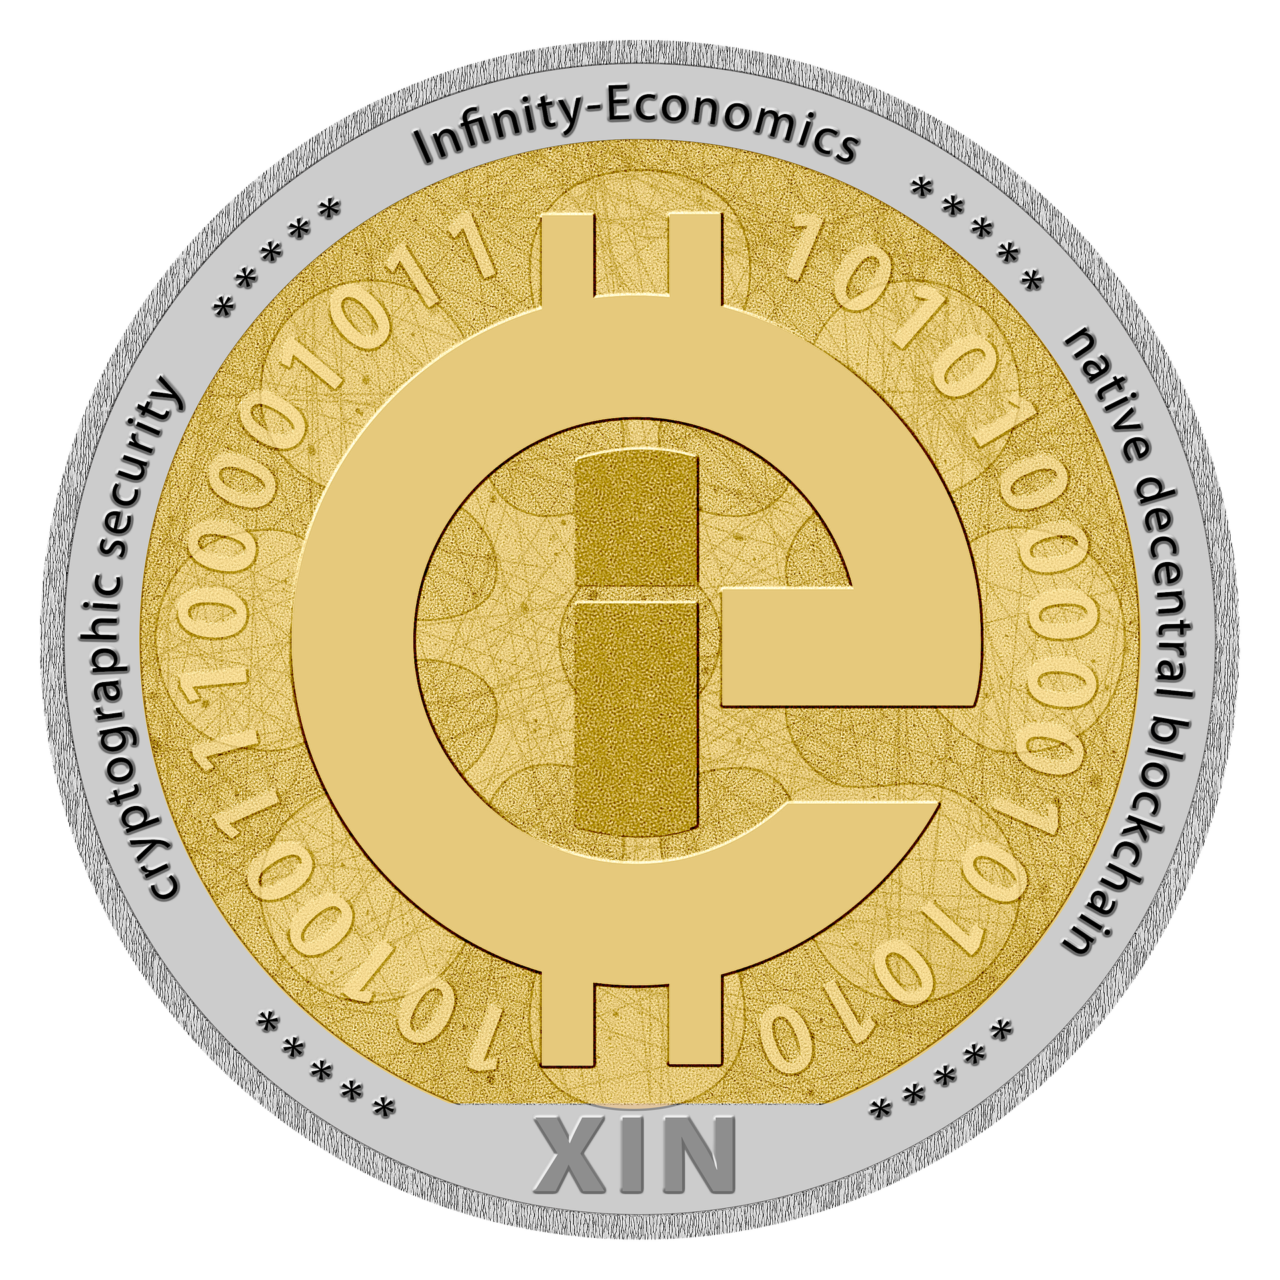 What Is A Emollient Coin? - E-Crypto News